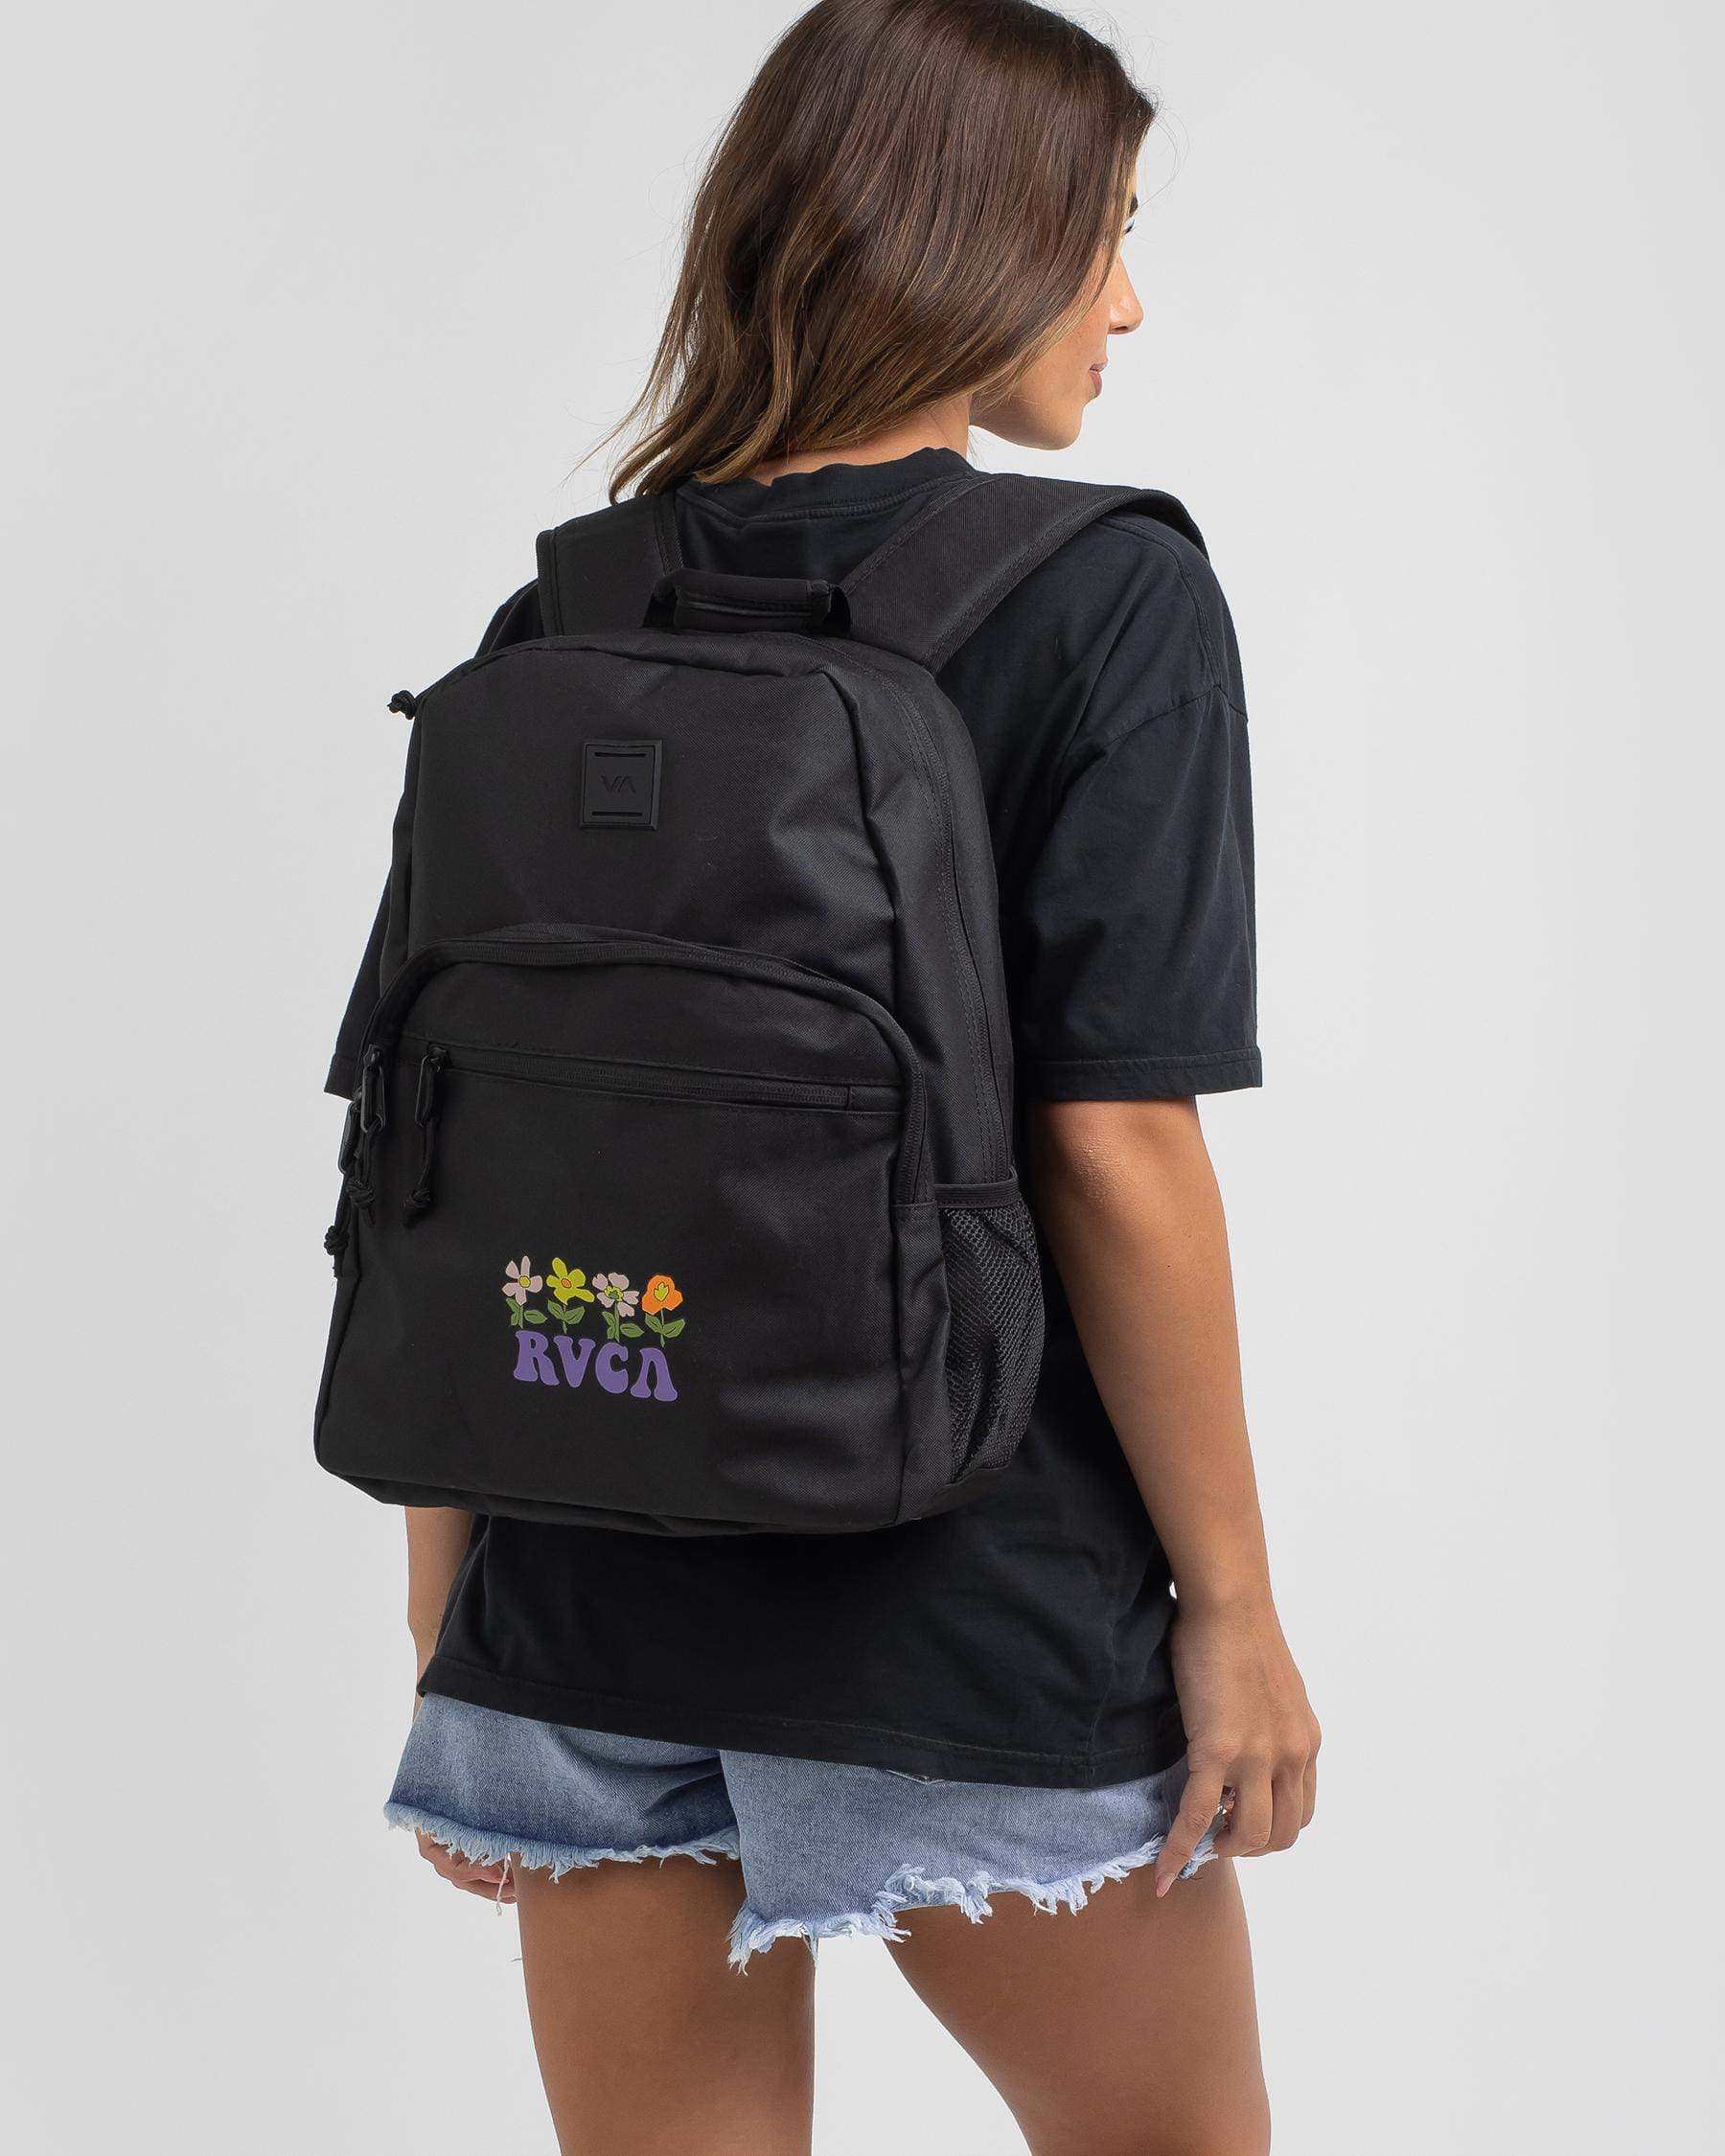 RVCA Growth Backpack In Black - Fast Shipping & Easy Returns - City ...